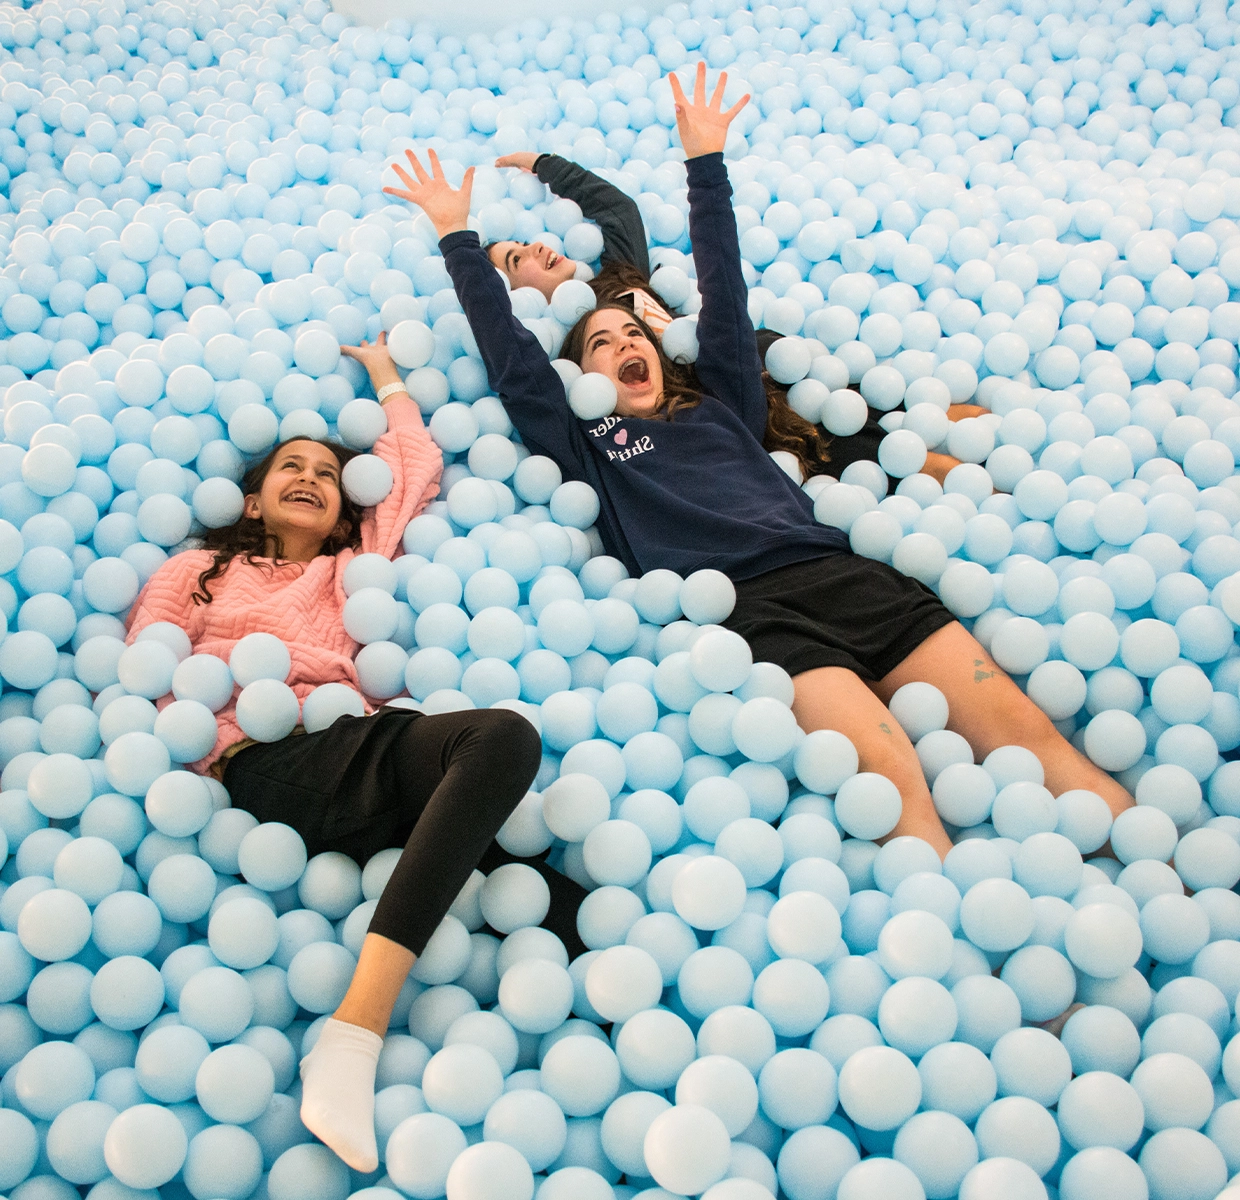 Two girls lie back in a sea of pale blue balls, laughing and creating memories at the Color Factory's interactive ball pit exhibit